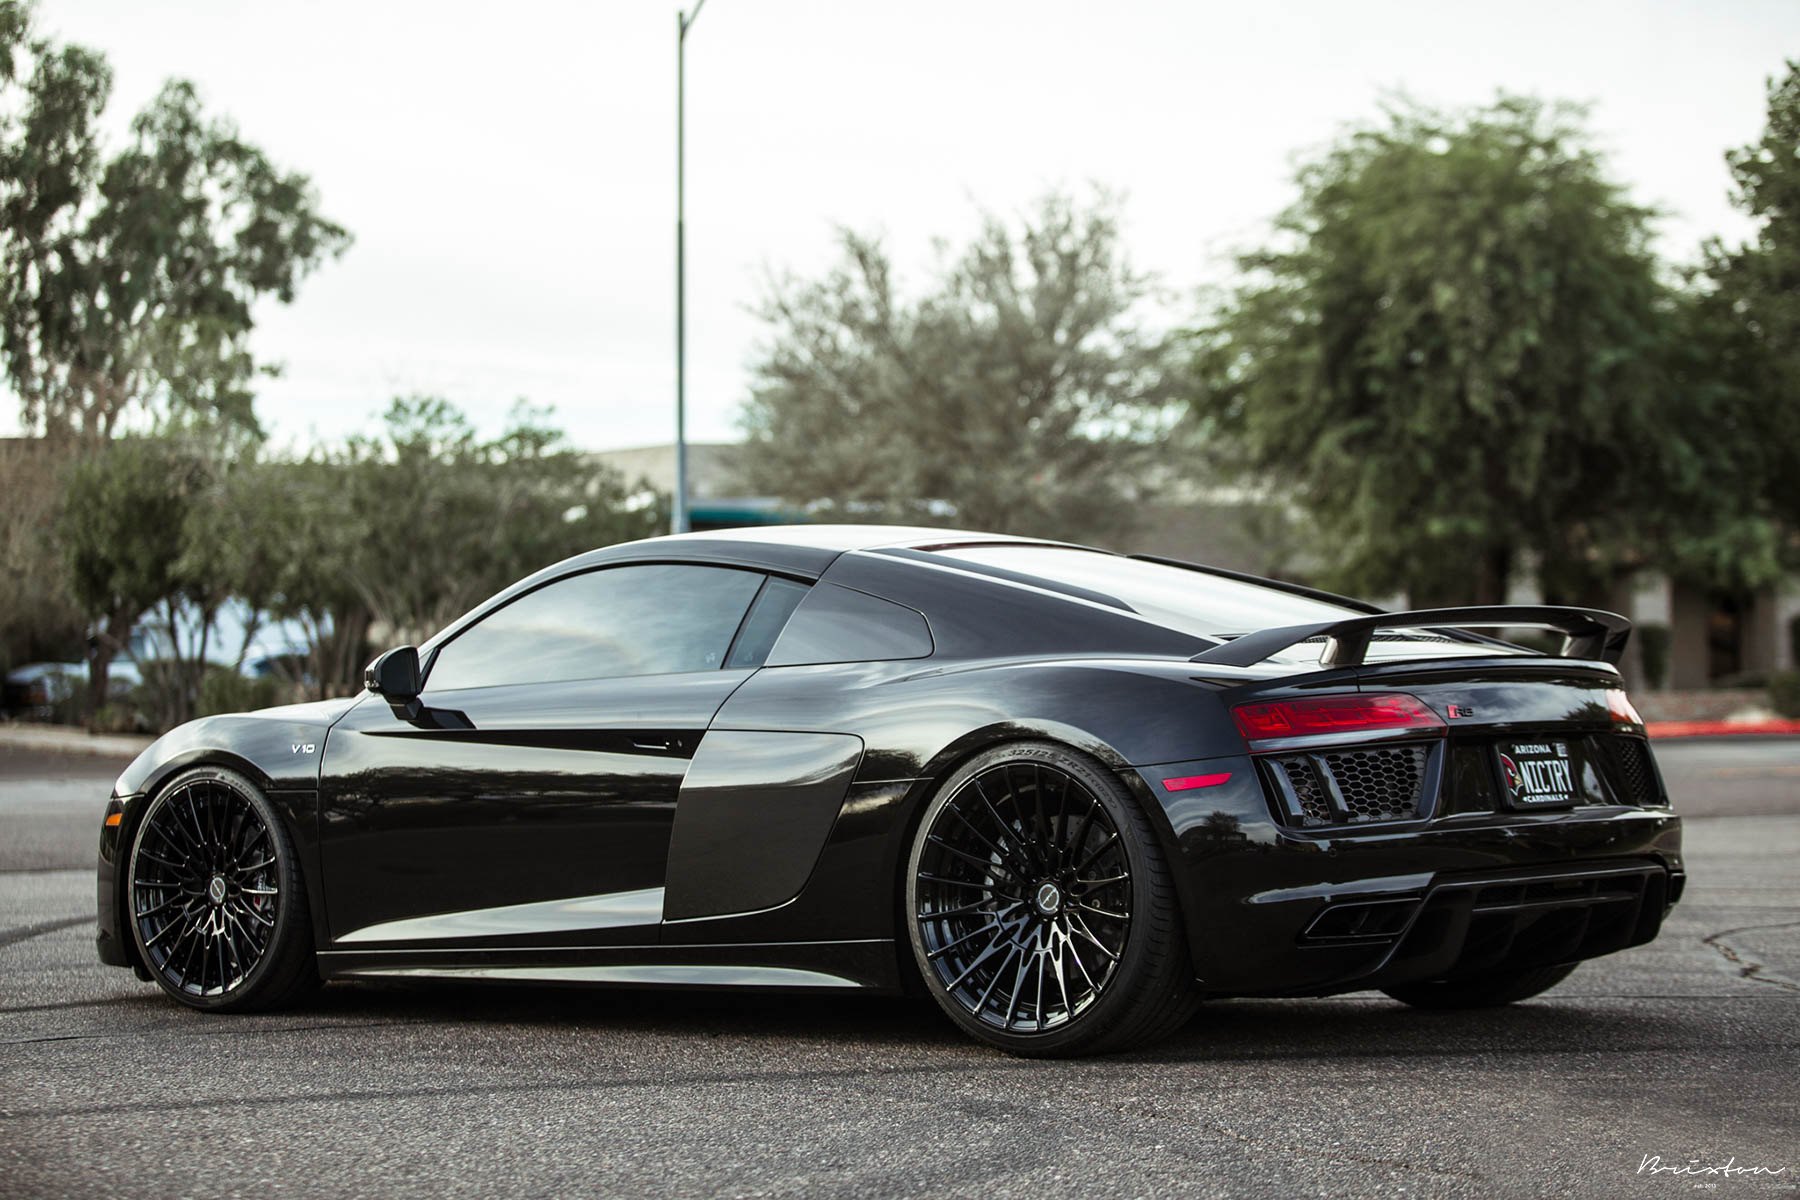 Custom Style Rear Spoiler on Black Audi R8 - Photo by Brixton Forged Wheels